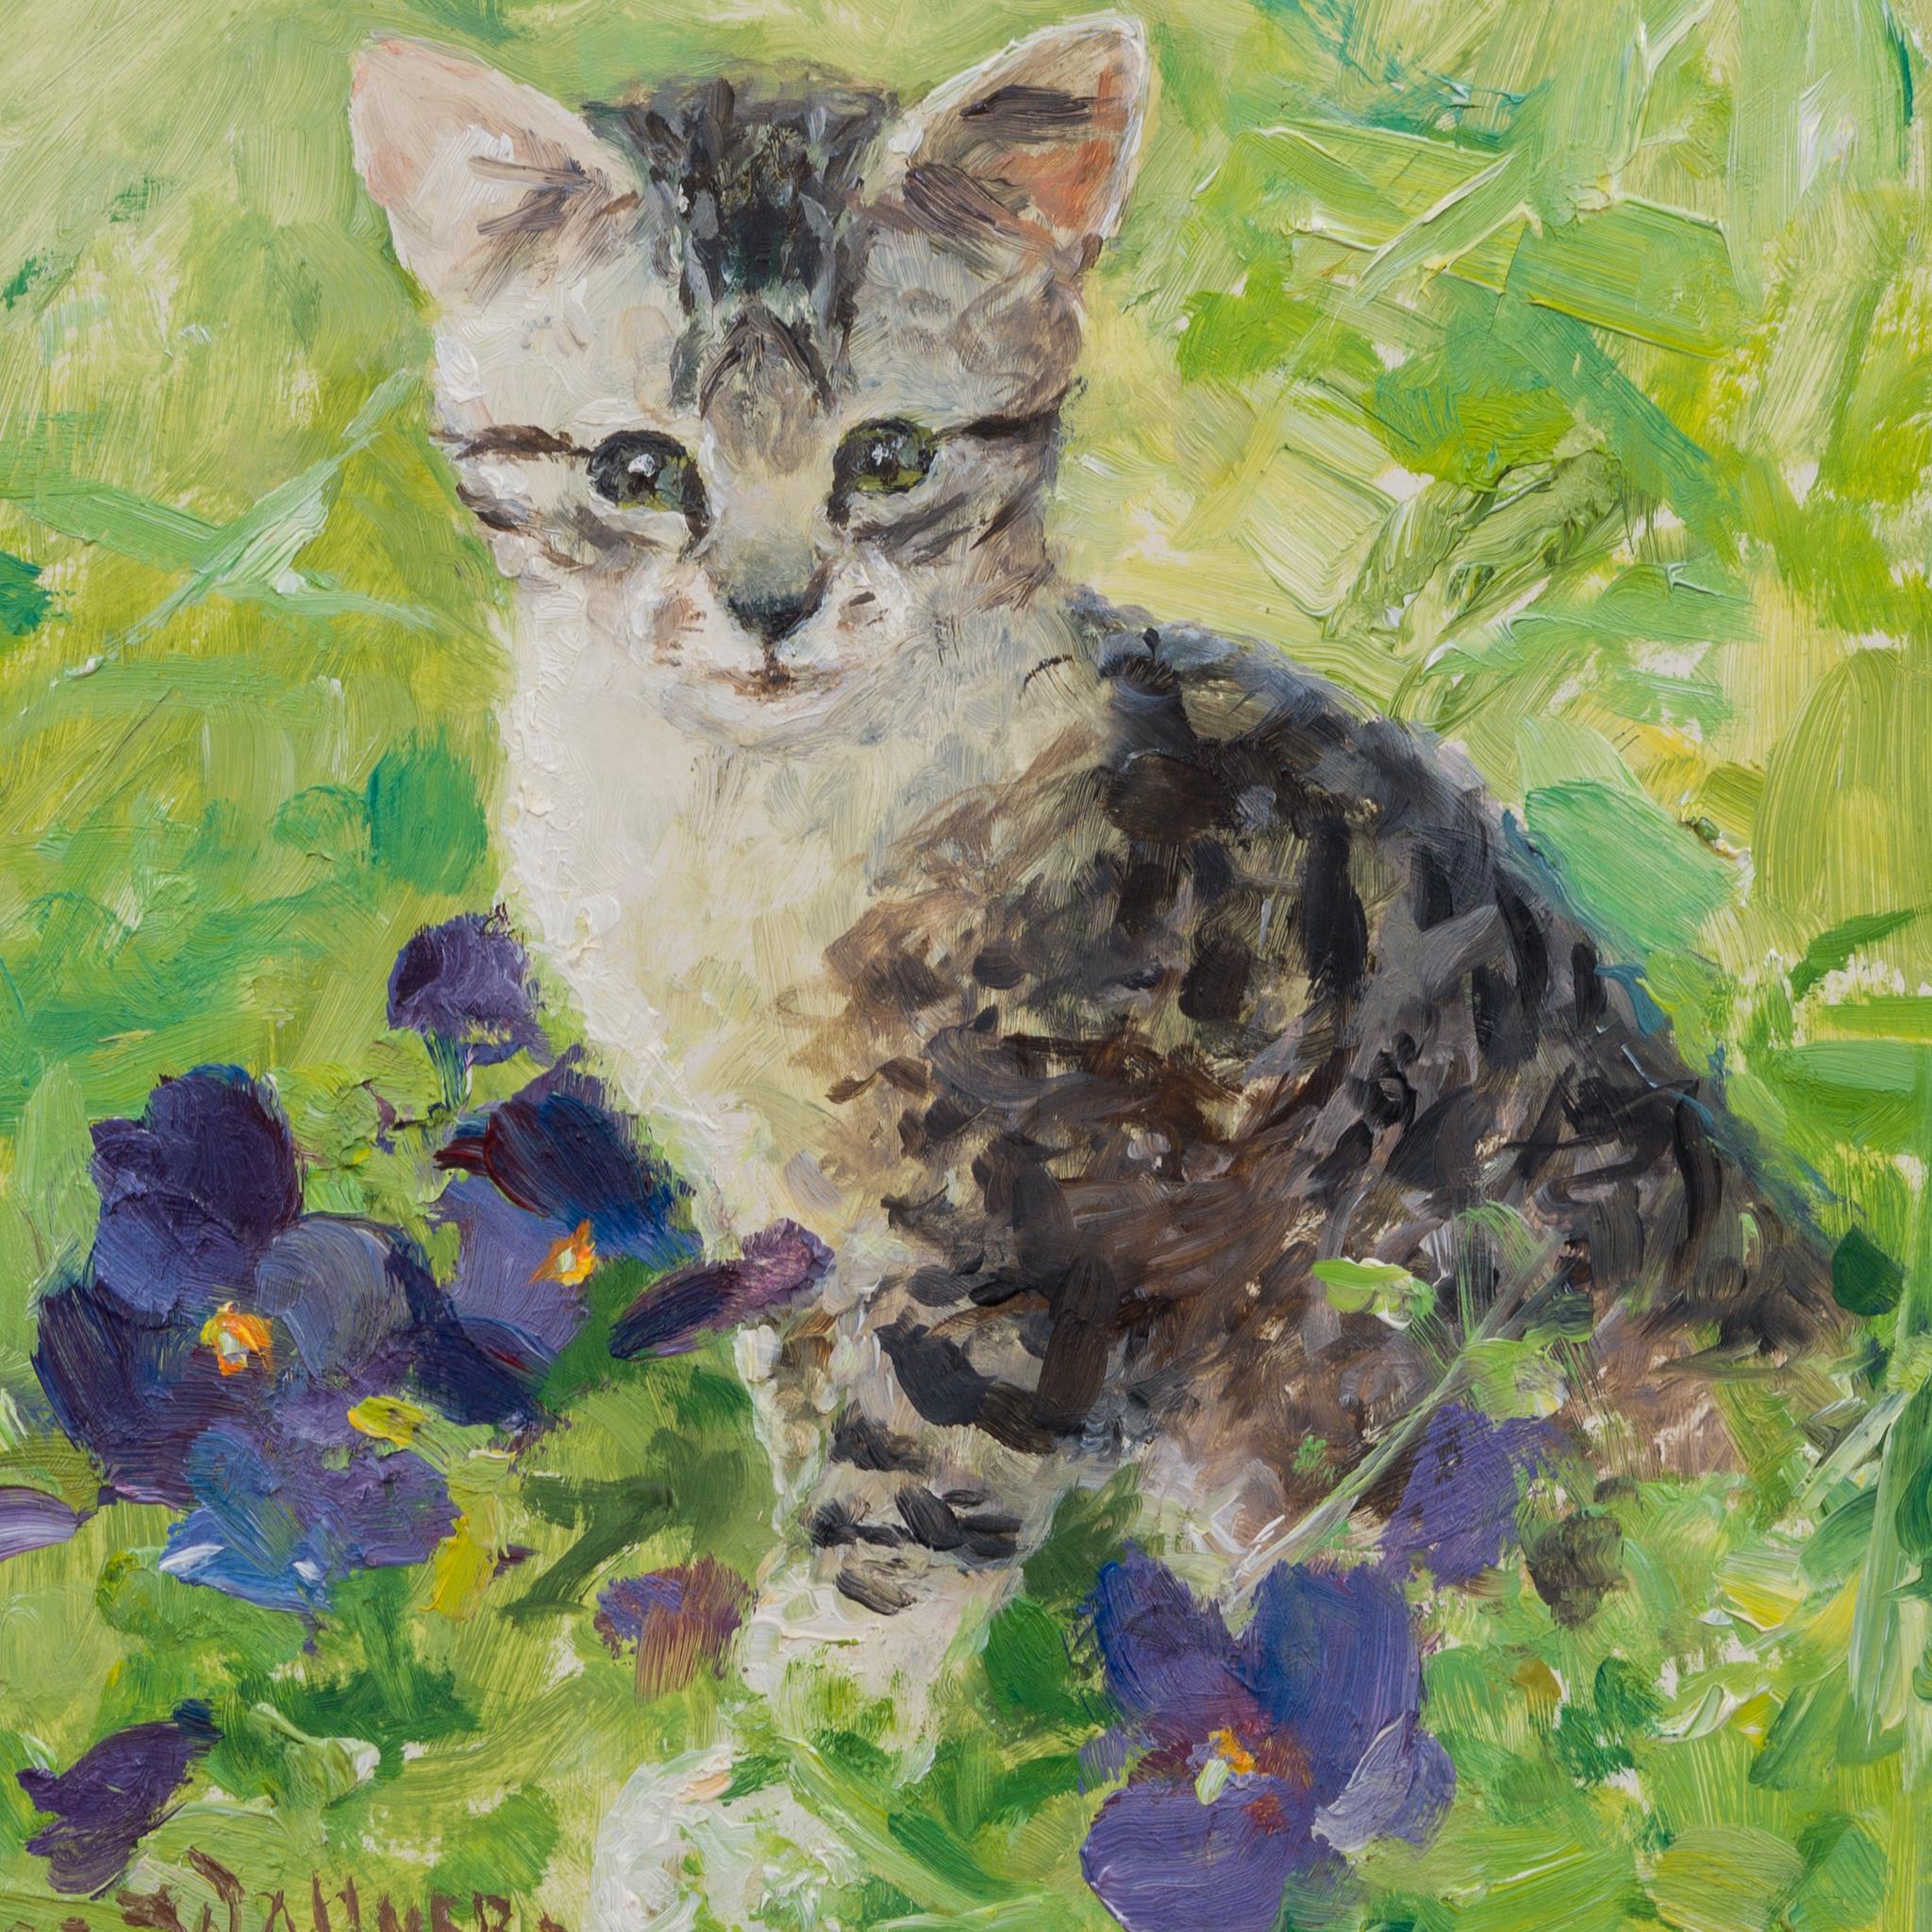 We are delighted to present for sale a charming oil painting by the Swedish artist Thure Wallner (1888-1965), showcasing a whimsical scene of a kitten nestled in the grass amidst blooming flowers. This piece is a tender representation of Wallner's